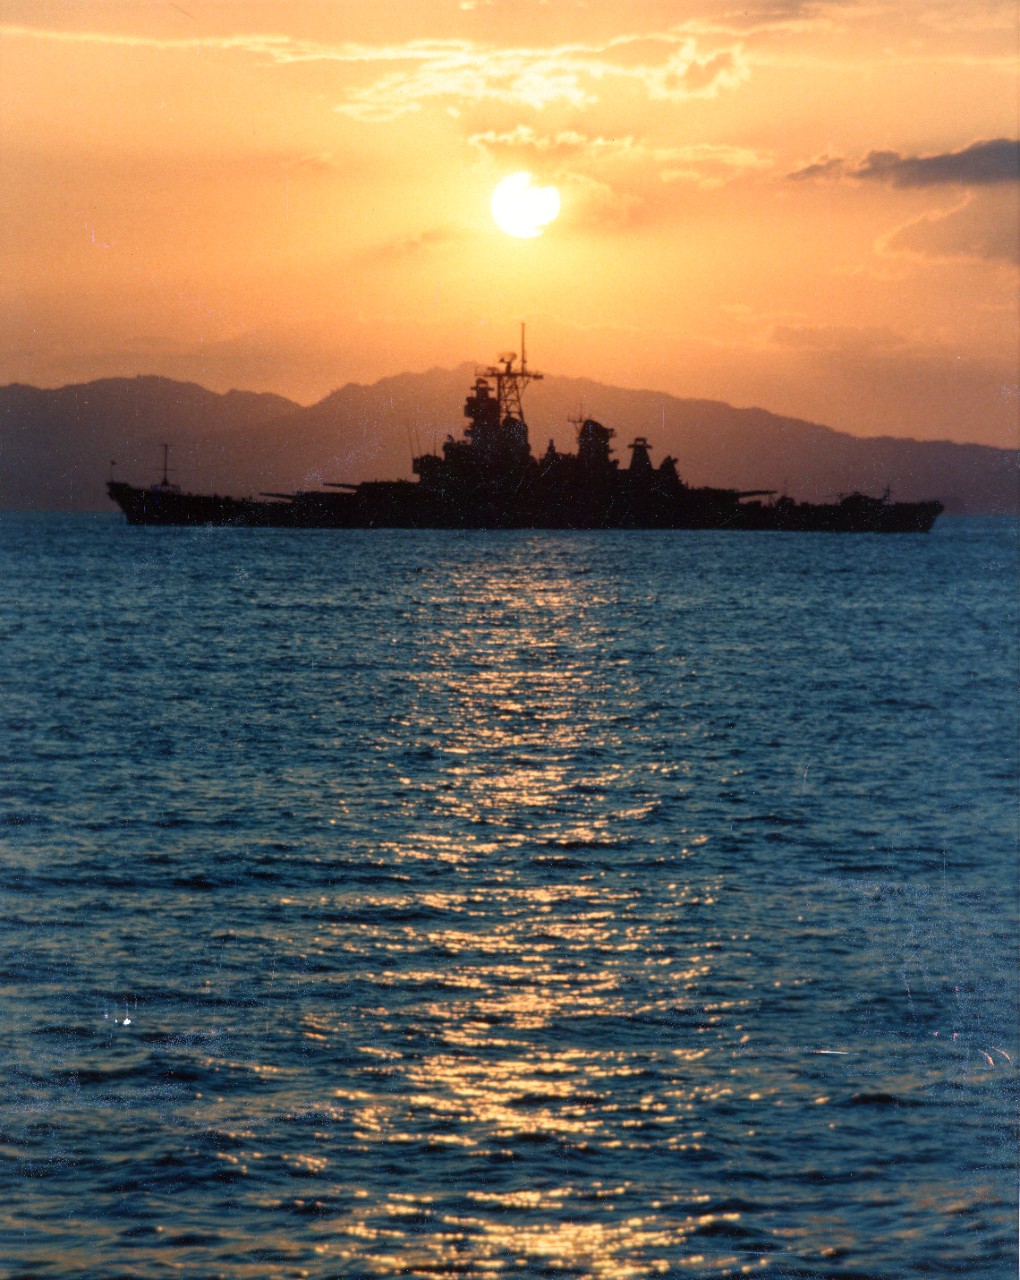 A port side view of the battleship USS Iowa (BB-61) at sunset, moored off Puerto Caldera, Costa Rica.